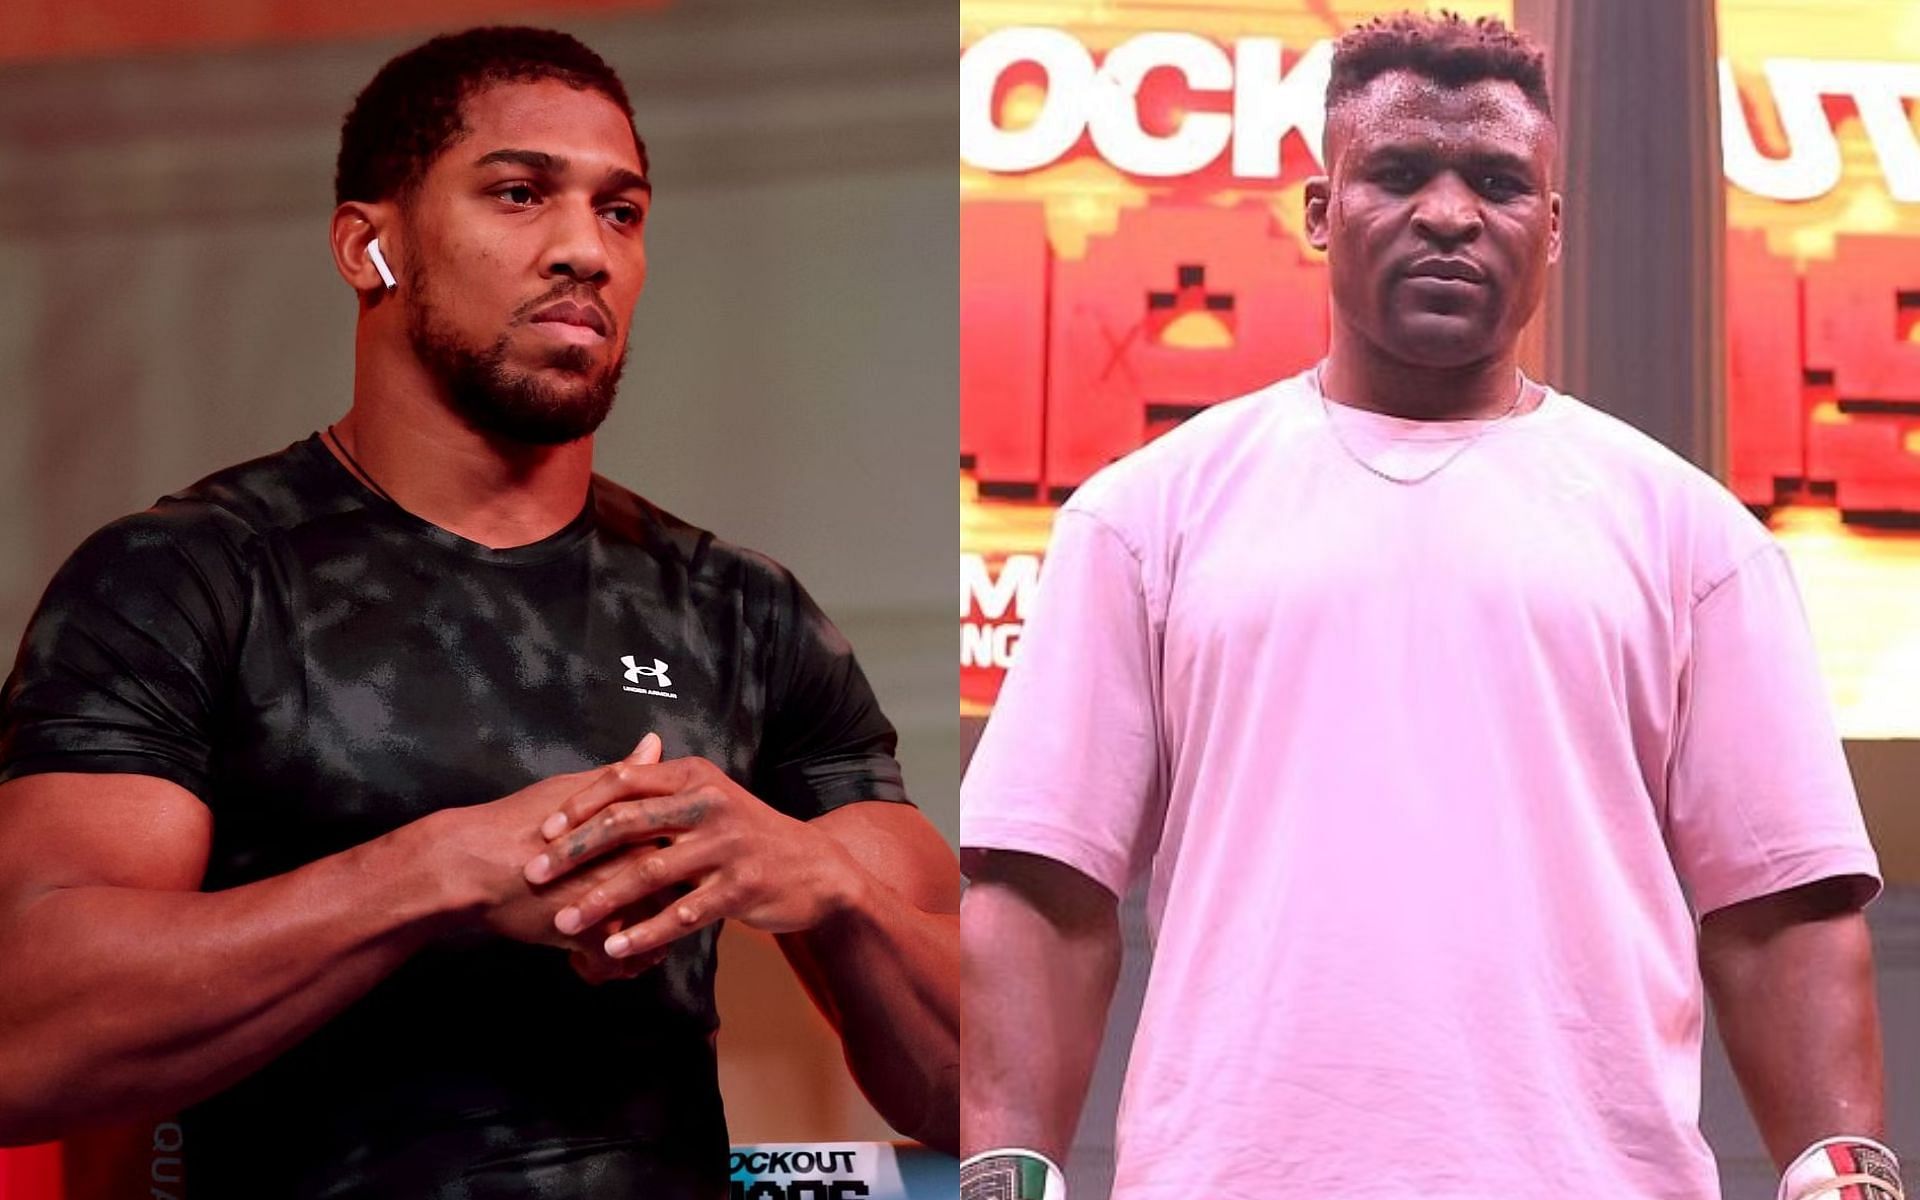 Francis Ngannou alleges troubling behavior from Anthony Joshua during promo shoot [Image courtesy: Getty Images]